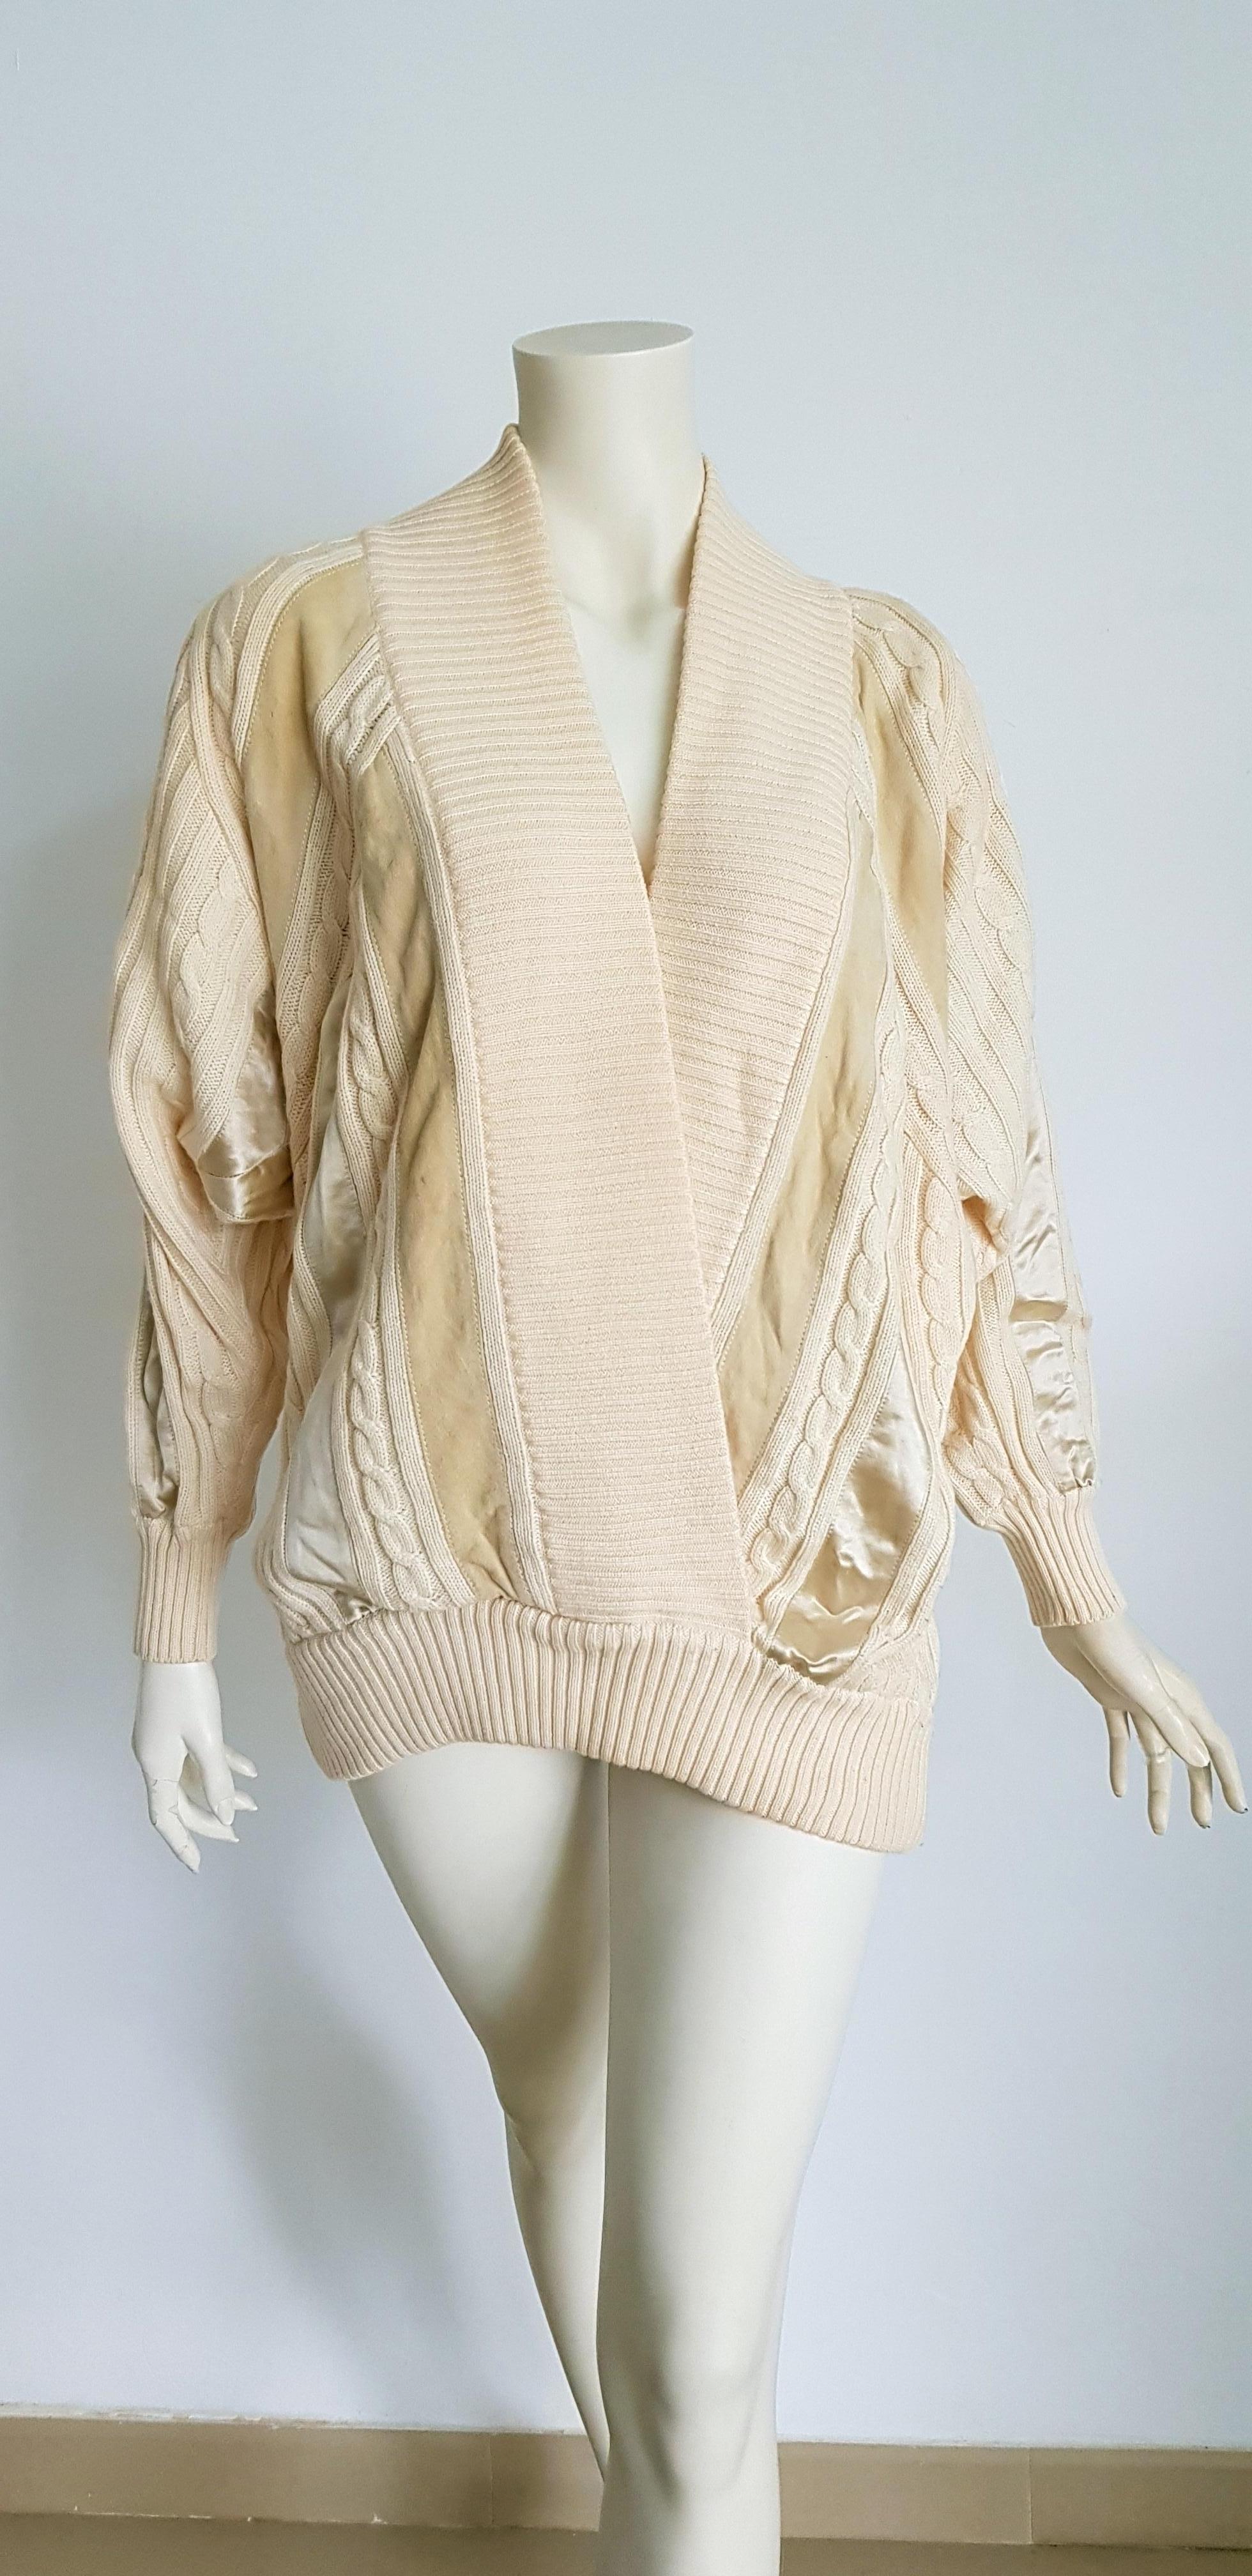 HERMES white cream wool collection sweater with silk suede strips - Unworn, New.

SIZE: equivalent to about Small / Medium, please review approx measurements as follows in cm: lenght 79, chest underarm to underarm 60, bust circumference 120, sleeve